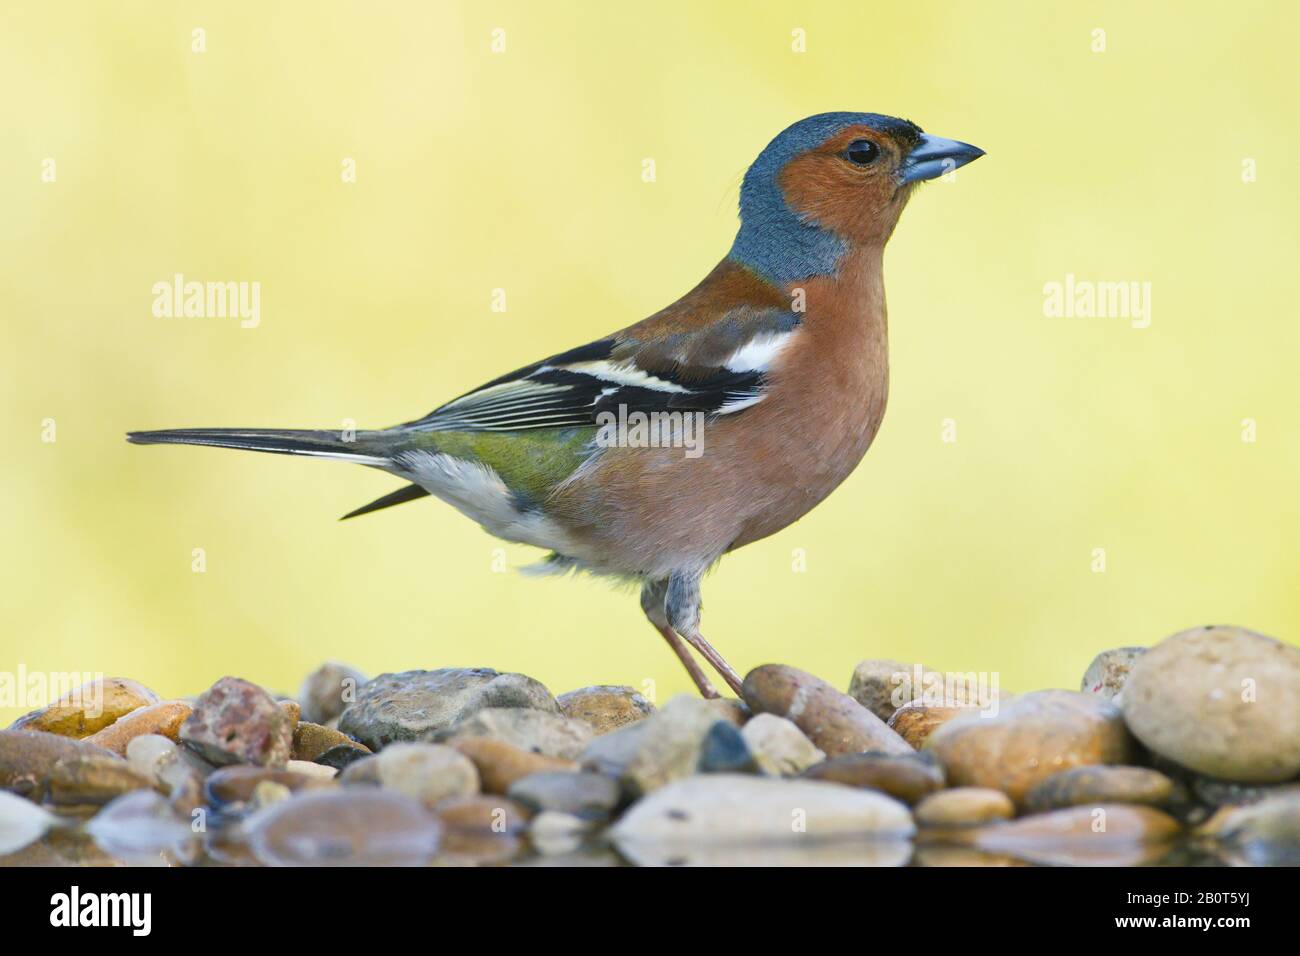 Jun. 27, 2018; Larrabetzu, Bizkaia (Basque Country). Male common chaffinch (Fringilla coelebs) near the water with a beautiful background full of unfo Stock Photo